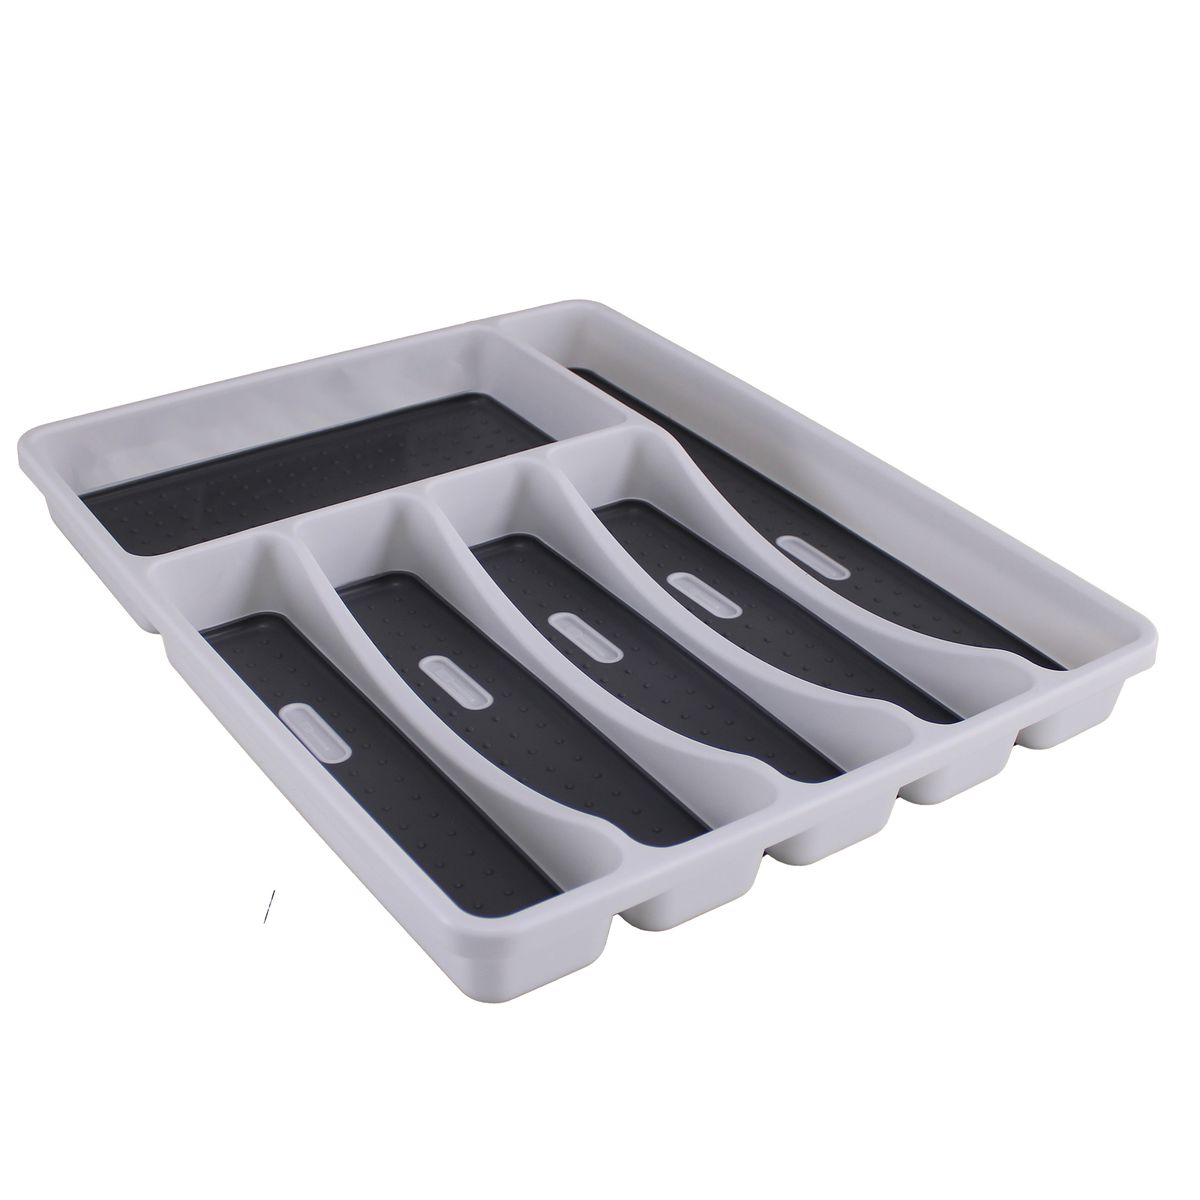 6 Compartment XL Drawer Cutlery Organizer Tray with Guide Icons 41x33cm